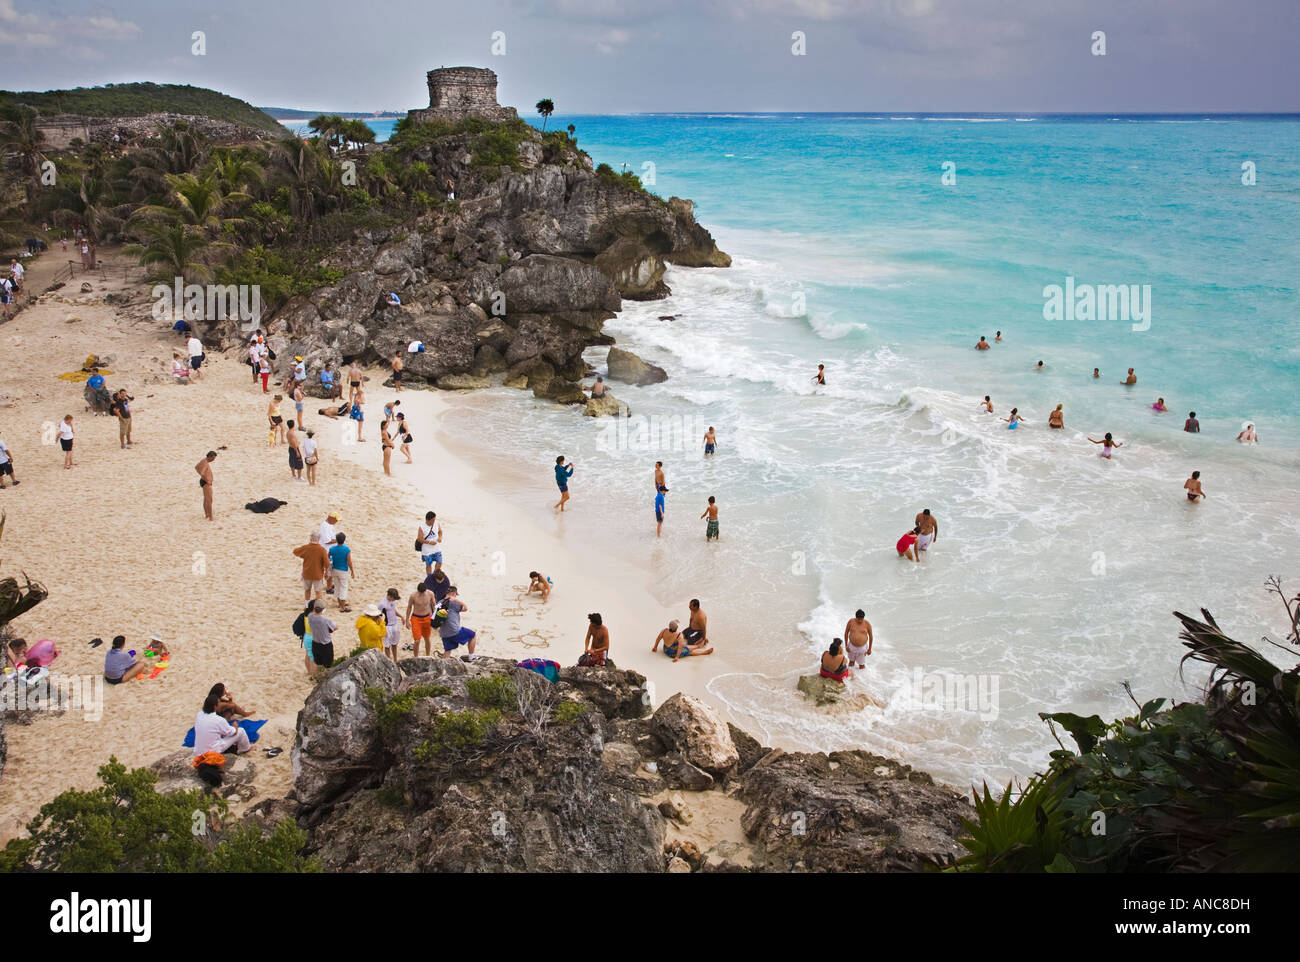 The beach and Mayan ruins of Tulum Located on the Yucatan Peninsula of Mexico Stock Photo